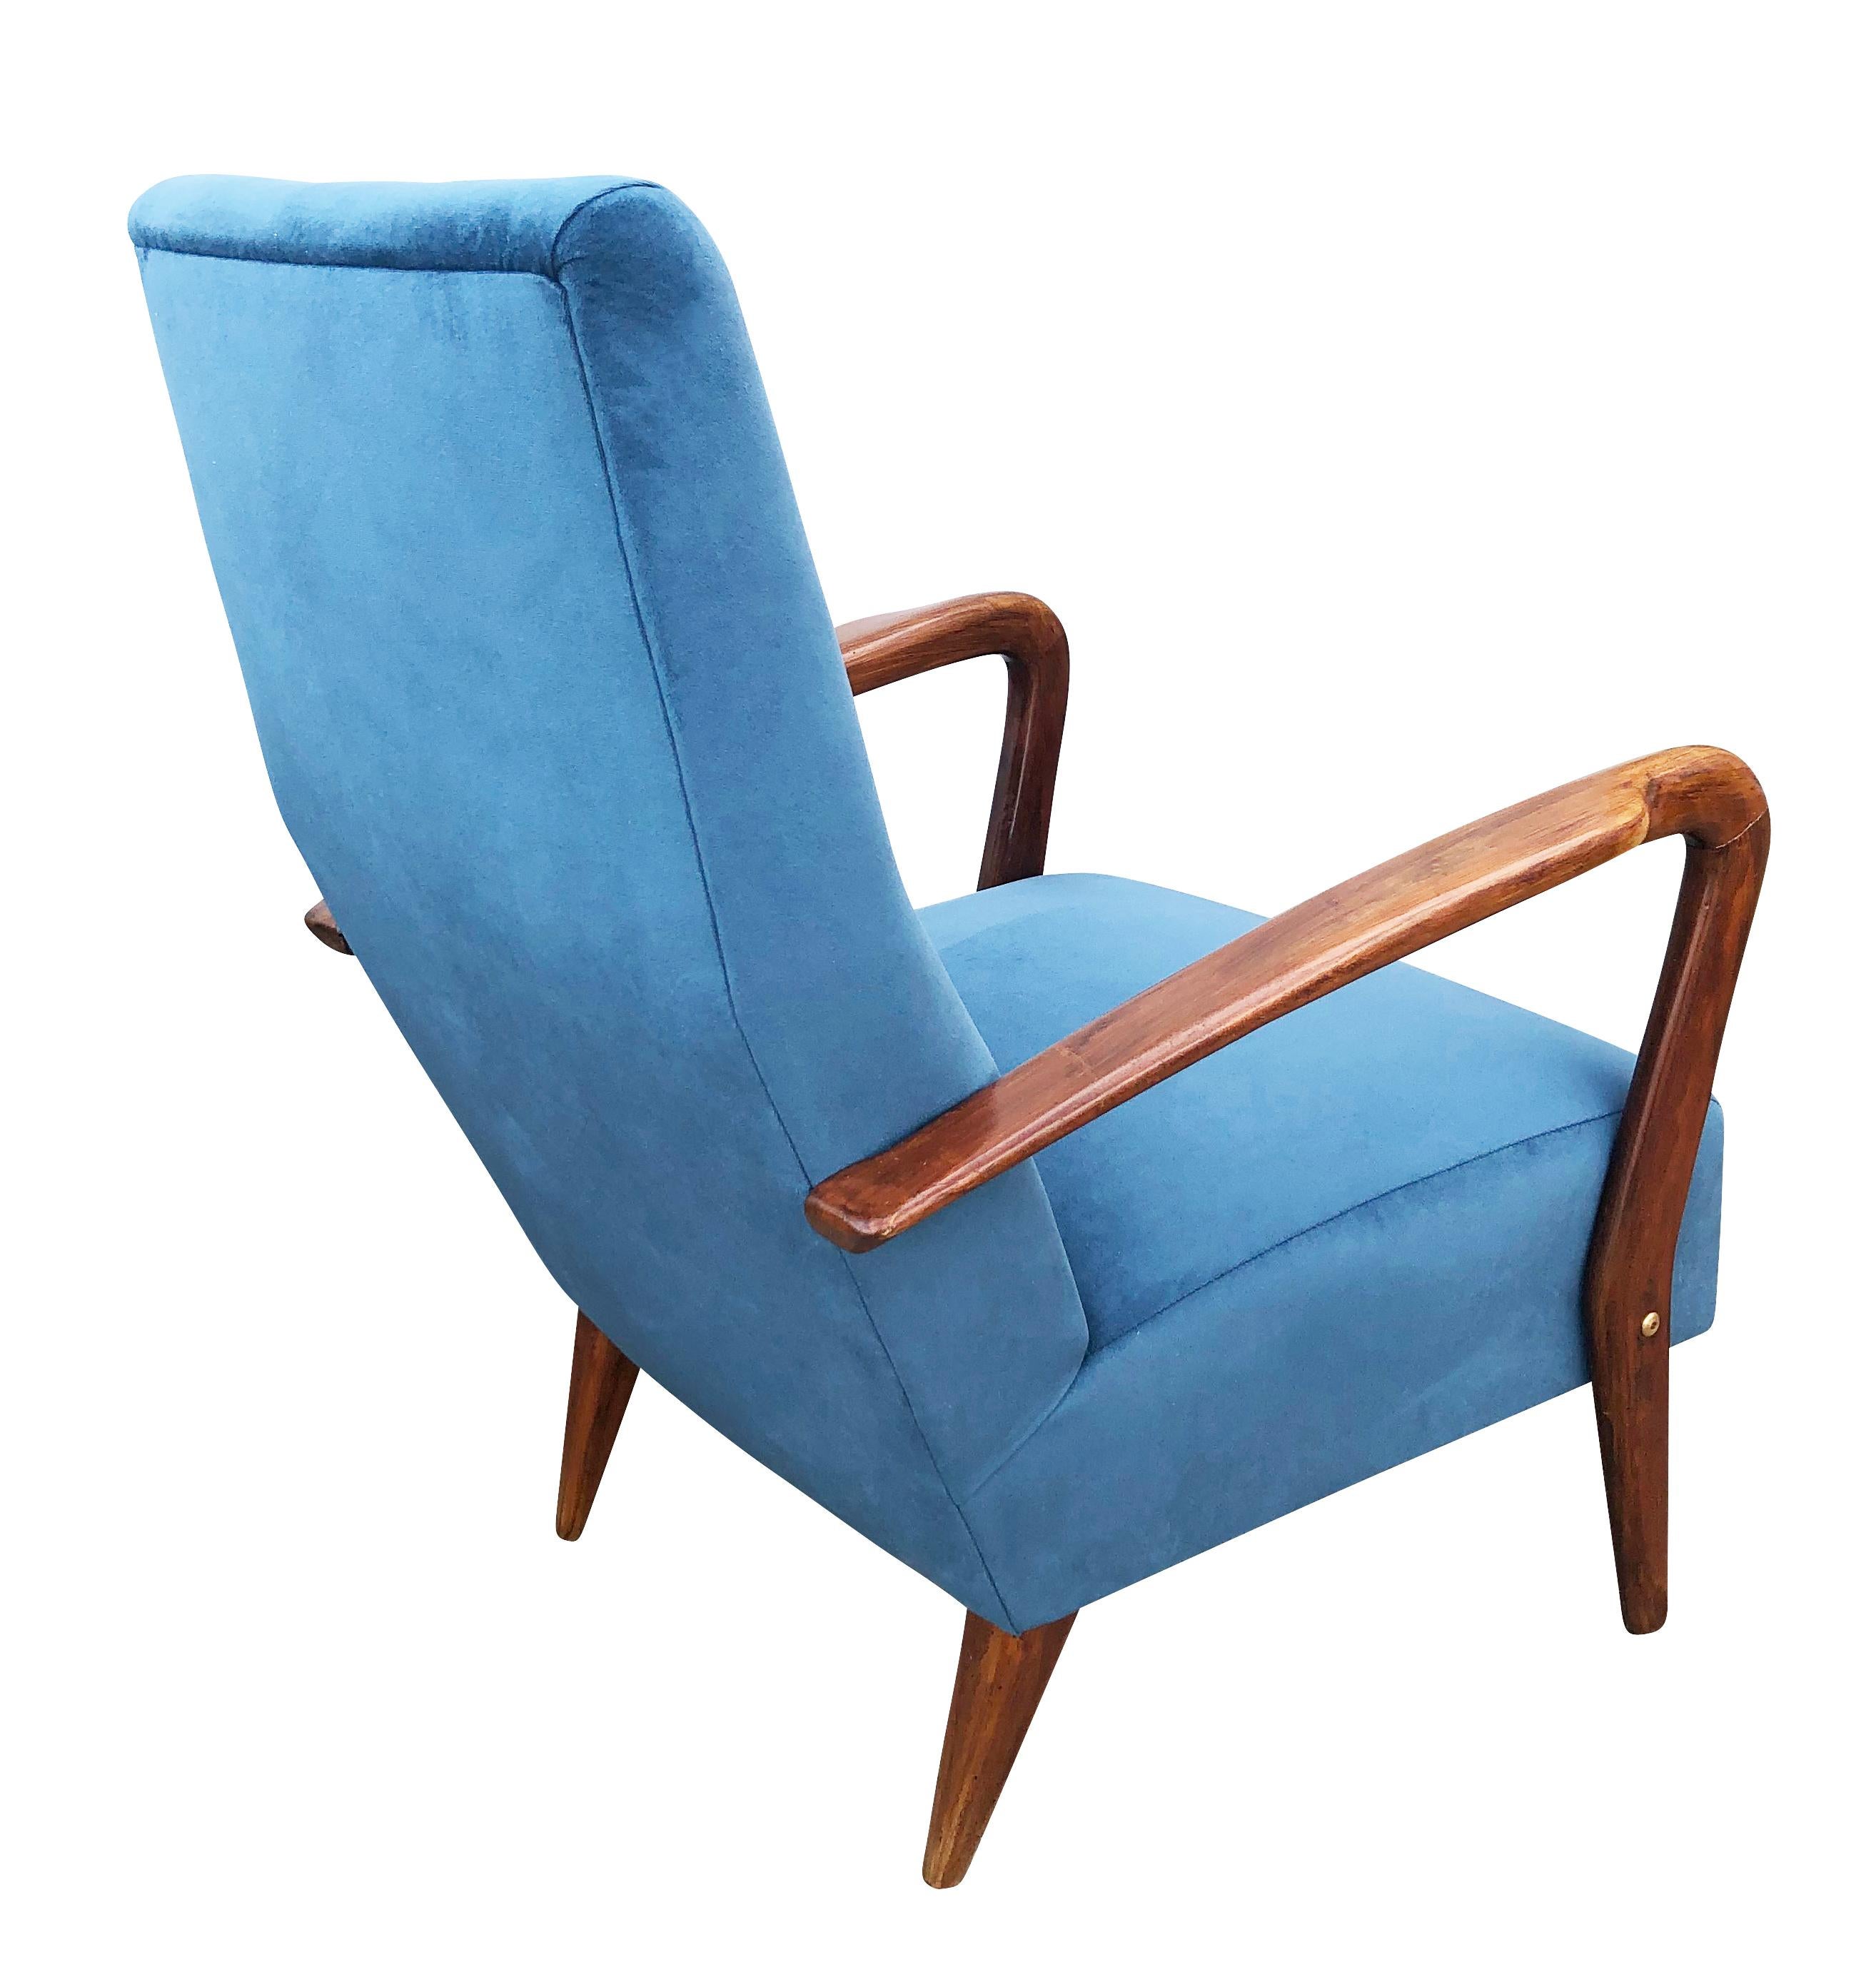 Italian midcentury lounge chair reminiscent of the style of Gio Ponti with wood armrests and legs. Recovered in a blue velvet.

Condition: Minor wear consistent with age and use. Recently recovered.

Measures: Width 26”

Depth 26”

Height